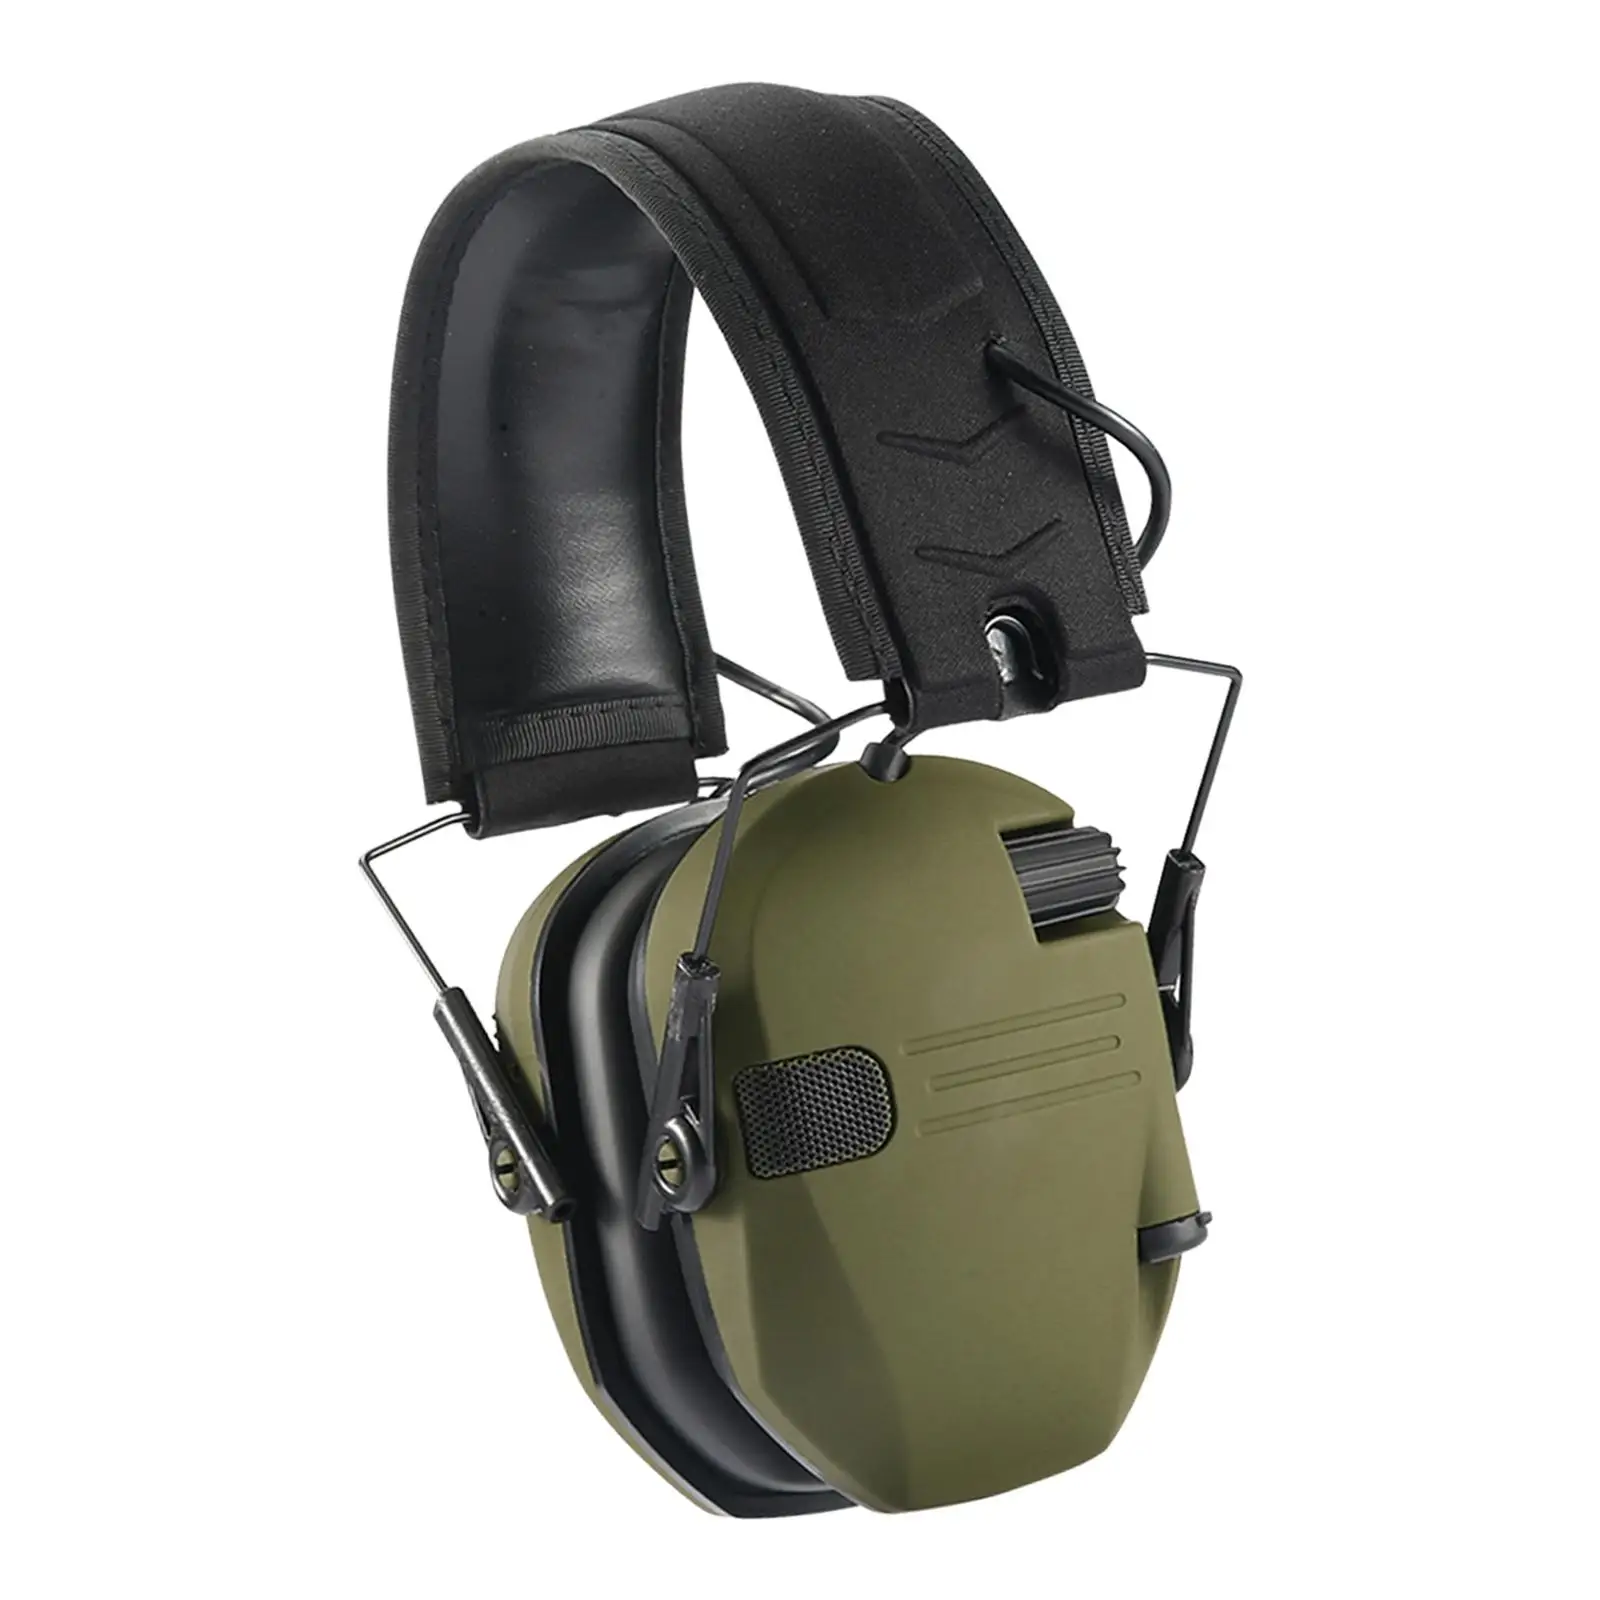 Electronic Earmuffs Safety Nrr 22dB Hearing Protection Foldable for Mowing Hunting Study Work Team Activities